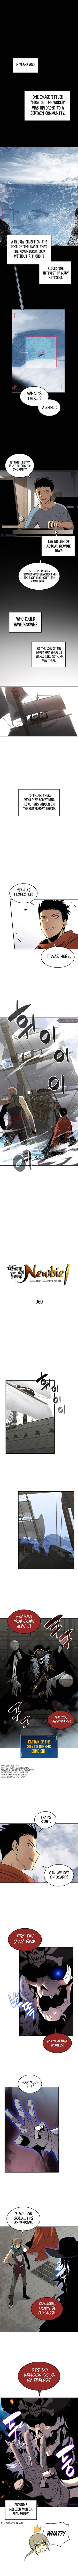 worn-and-torn-newbie-chap-60-1